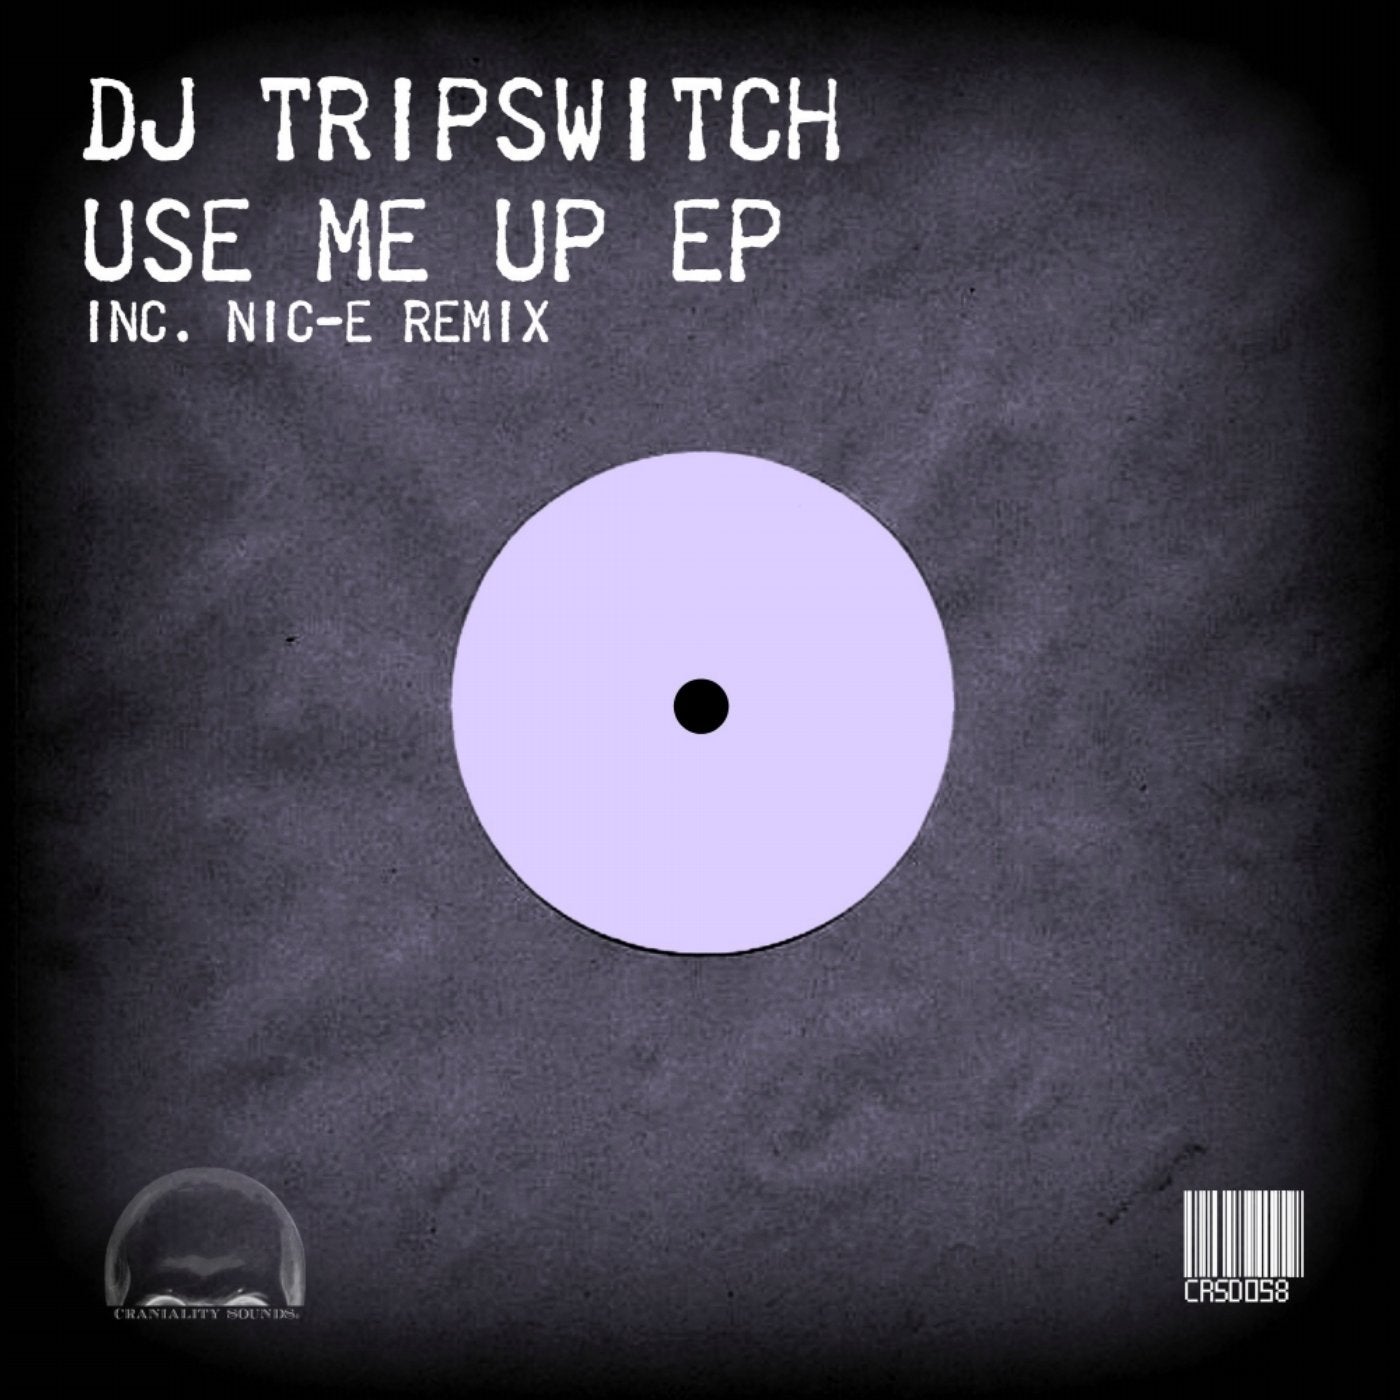 Use Me Up EP